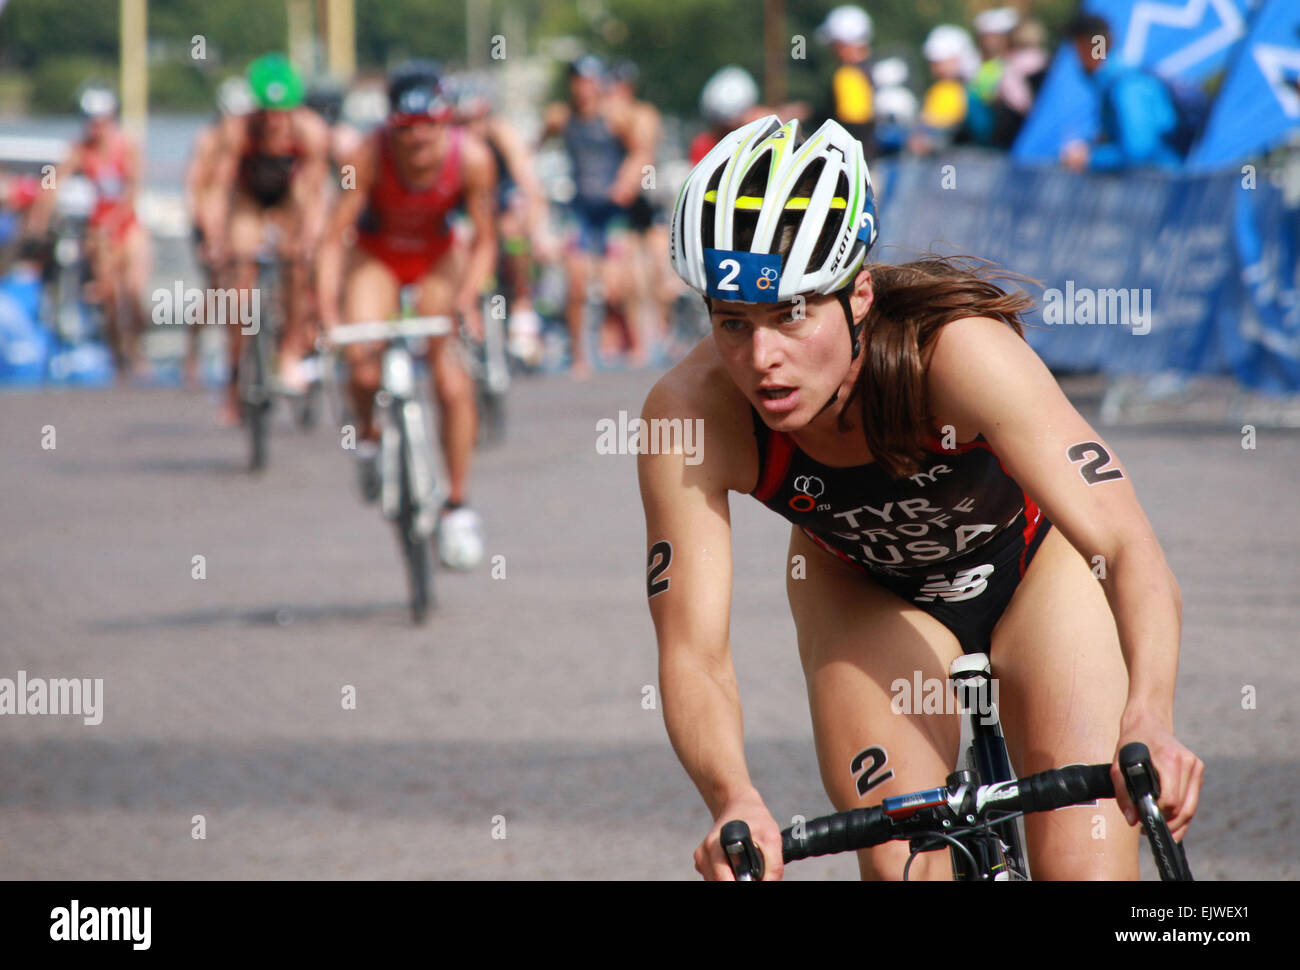 STOCKHOLM - AUG 23: Sarah Groff in the lead of the Women's ITU World Triathlon series event August 23, 2014 in Stockholm, Sweden Stock Photo